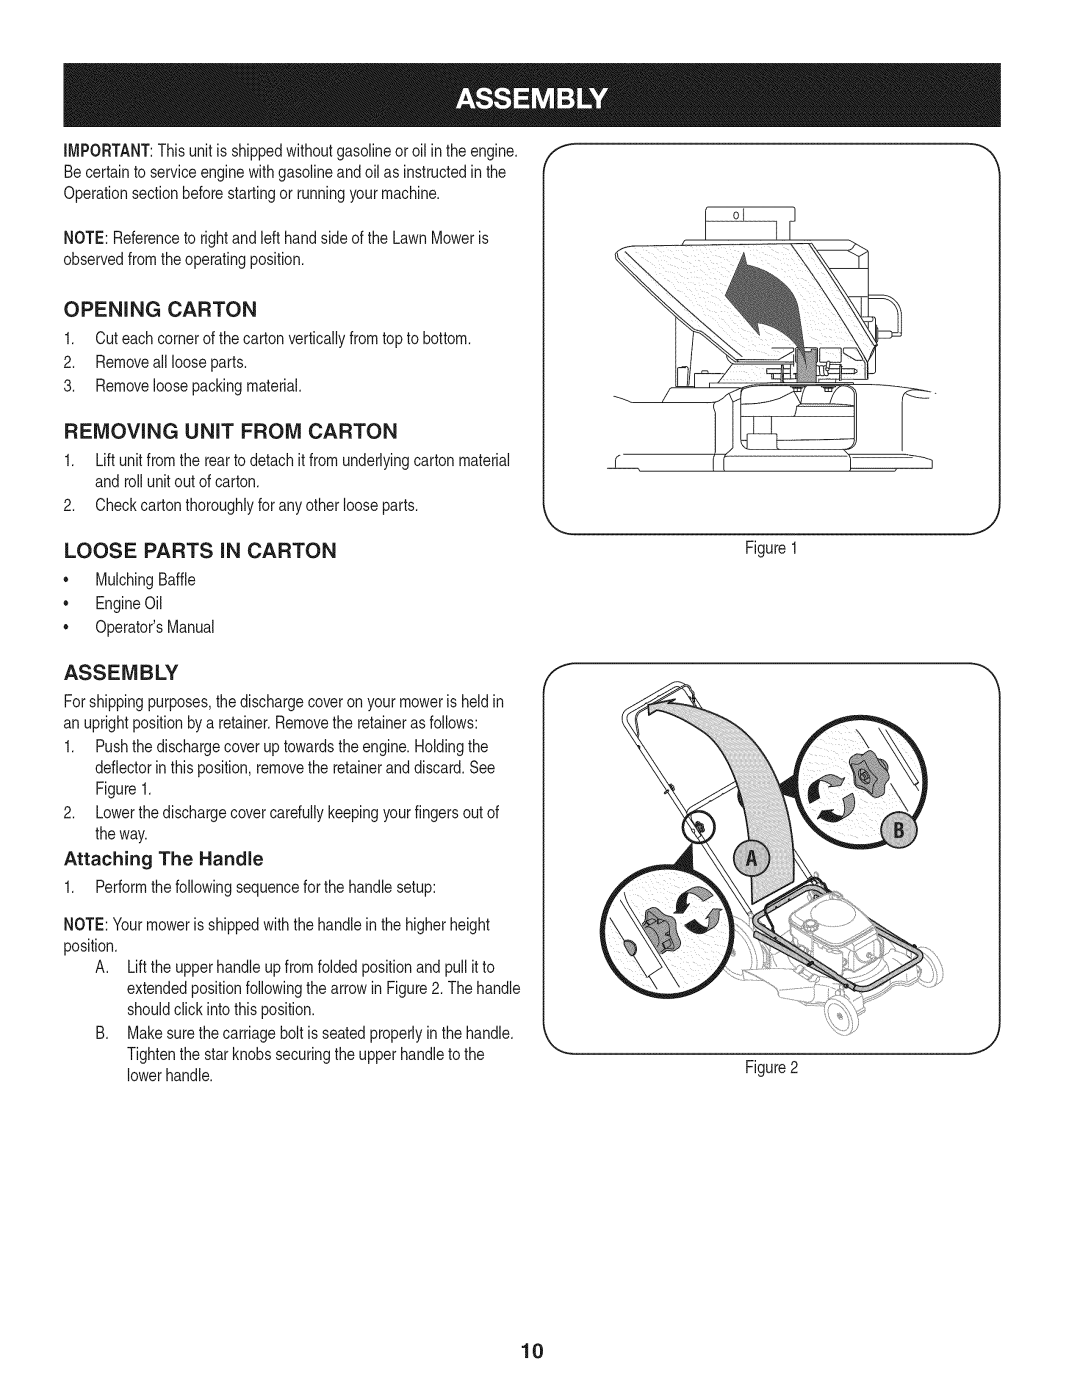 Craftsman 38528 manual Opening Carton, Removing Unit From Carton, Loose Parts In Carton, Assembly, Attaching The Handle 